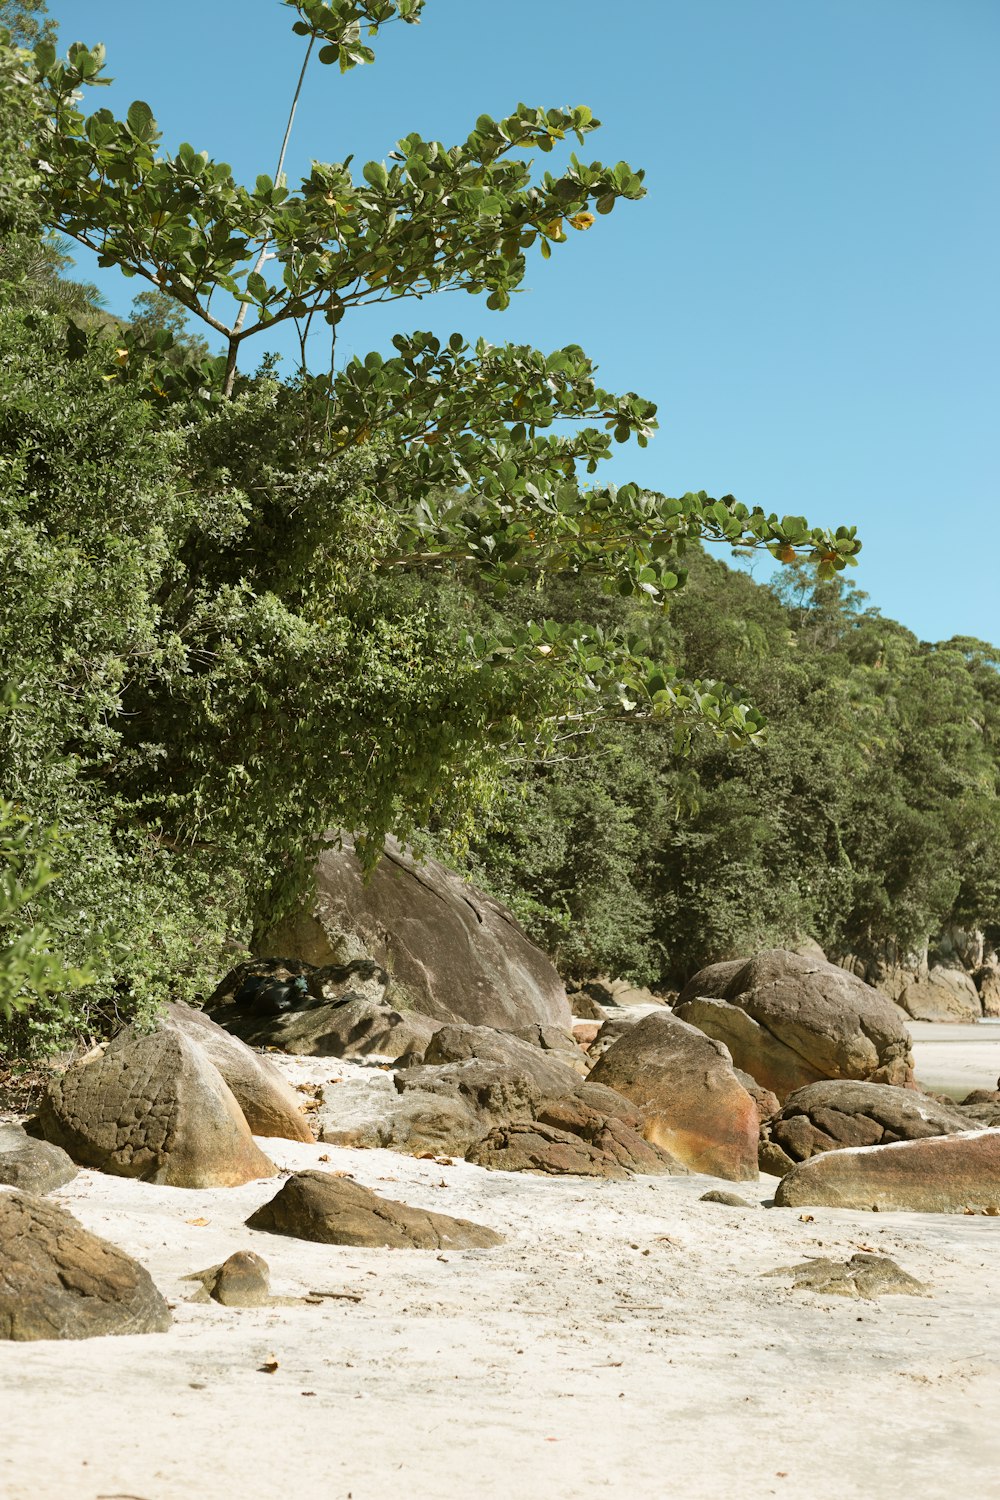 a group of rocks and trees on a beach